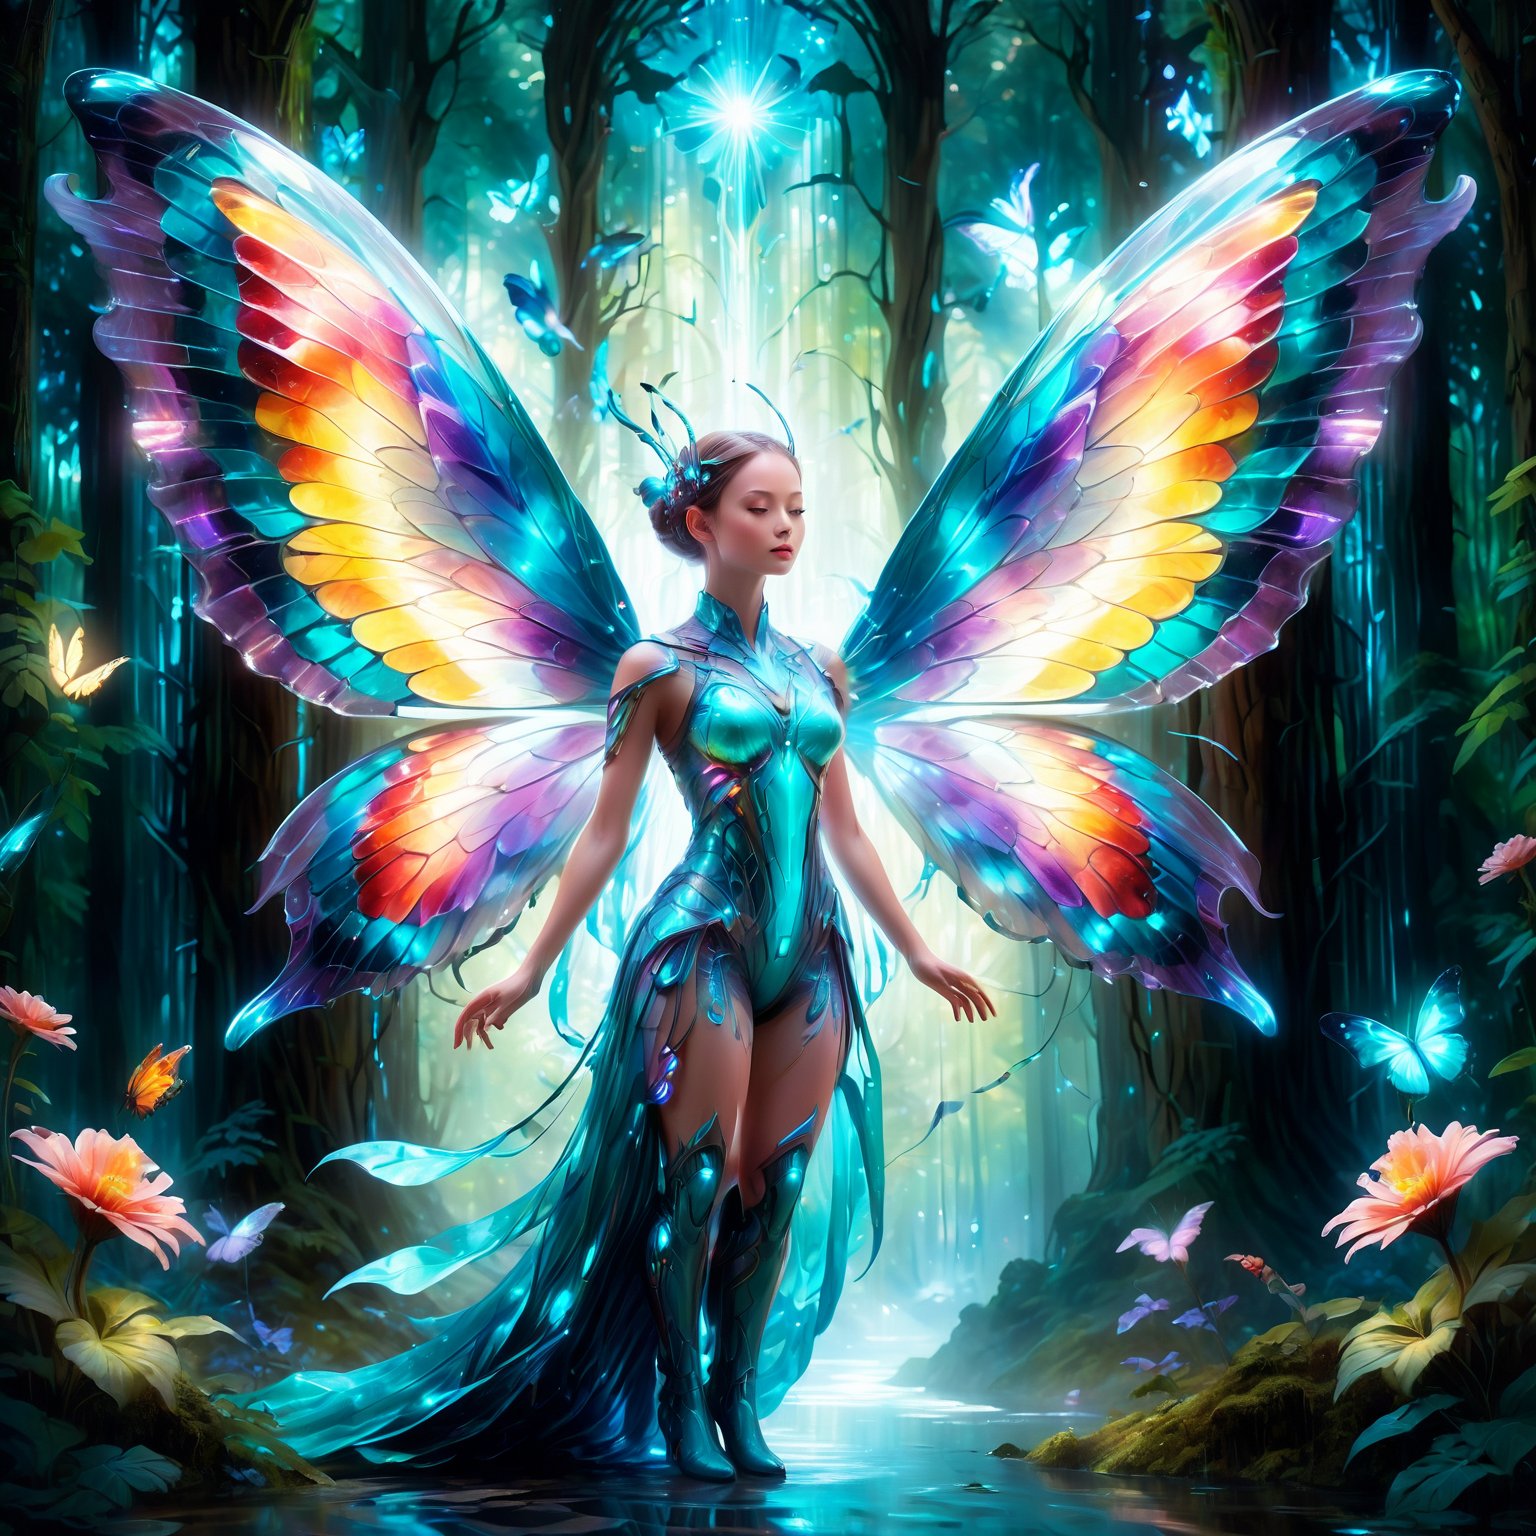 In a surreal digital artwork, a girl with radiant butterfly wings stands in a mystical forest. Her body emits a gentle, pulsating glow, casting an ethereal light that reveals hidden forest details. The wings, a masterpiece of nature's art, display a kaleidoscope of shimmering colors, from deep sea blues to fiery sunset oranges. She seems to dance on the air, her movements graceful and fluid, surrounded by a halo of softly glowing particles. This captivating scene, with its rich palette and dreamy atmosphere, is a testament to the digital artist's skill, blending fantasy and realism in a breathtaking visual narrative.